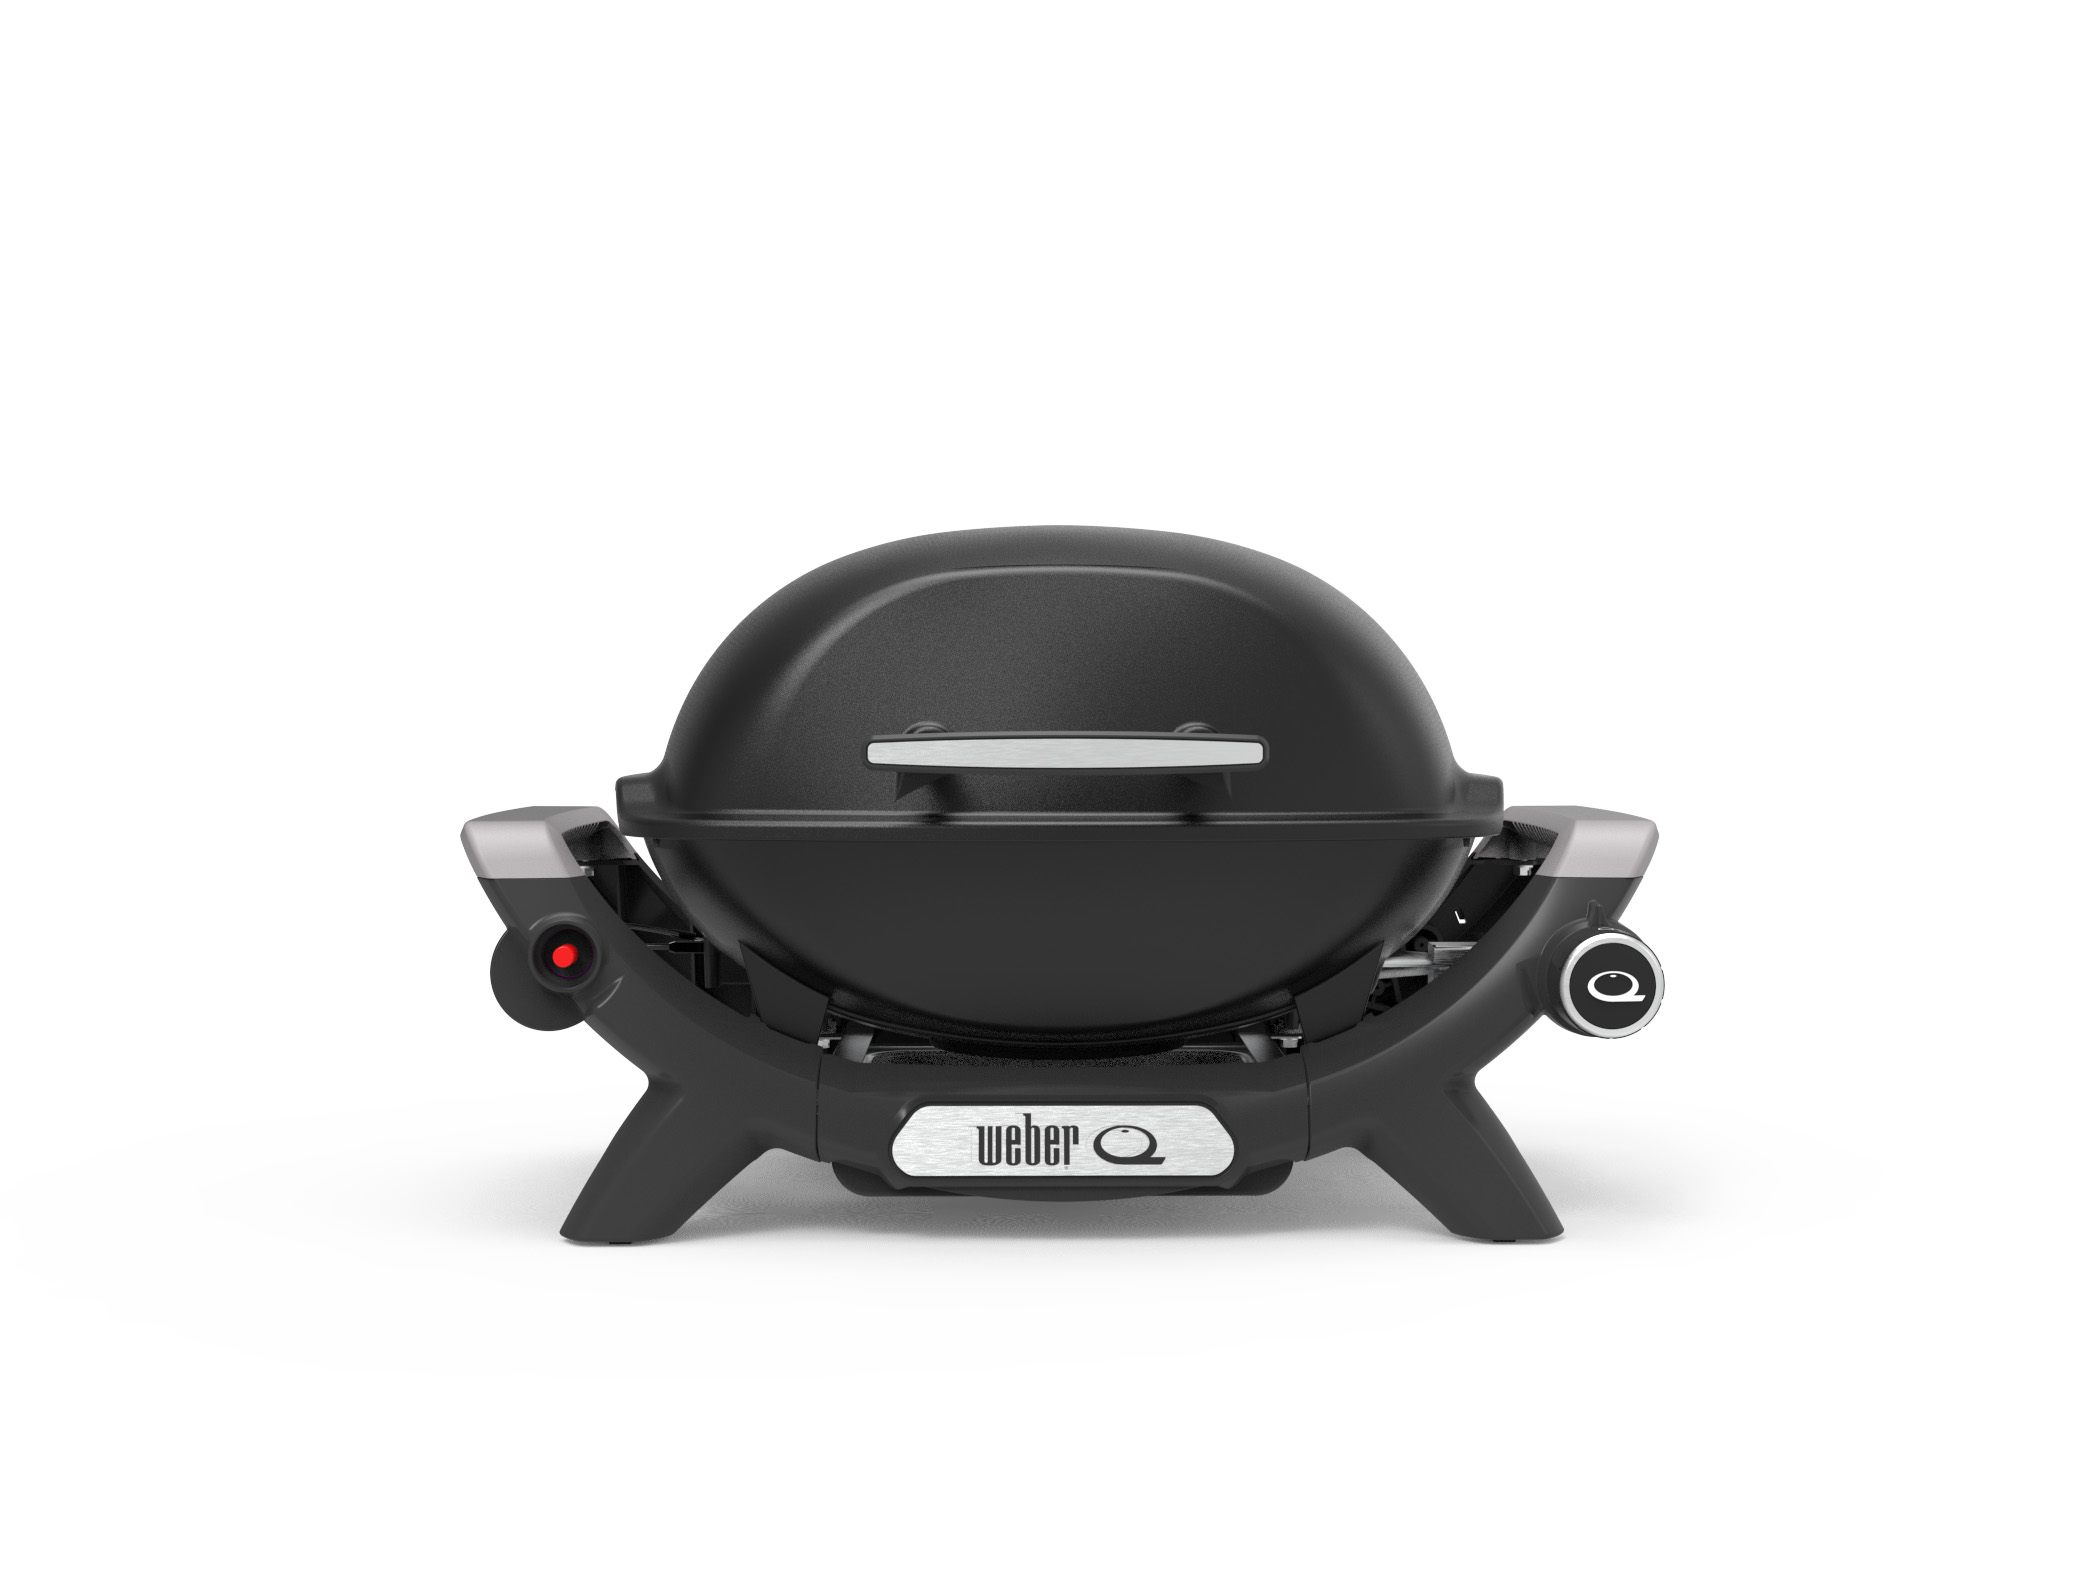 Weber Q 1000 N in midnight black front view